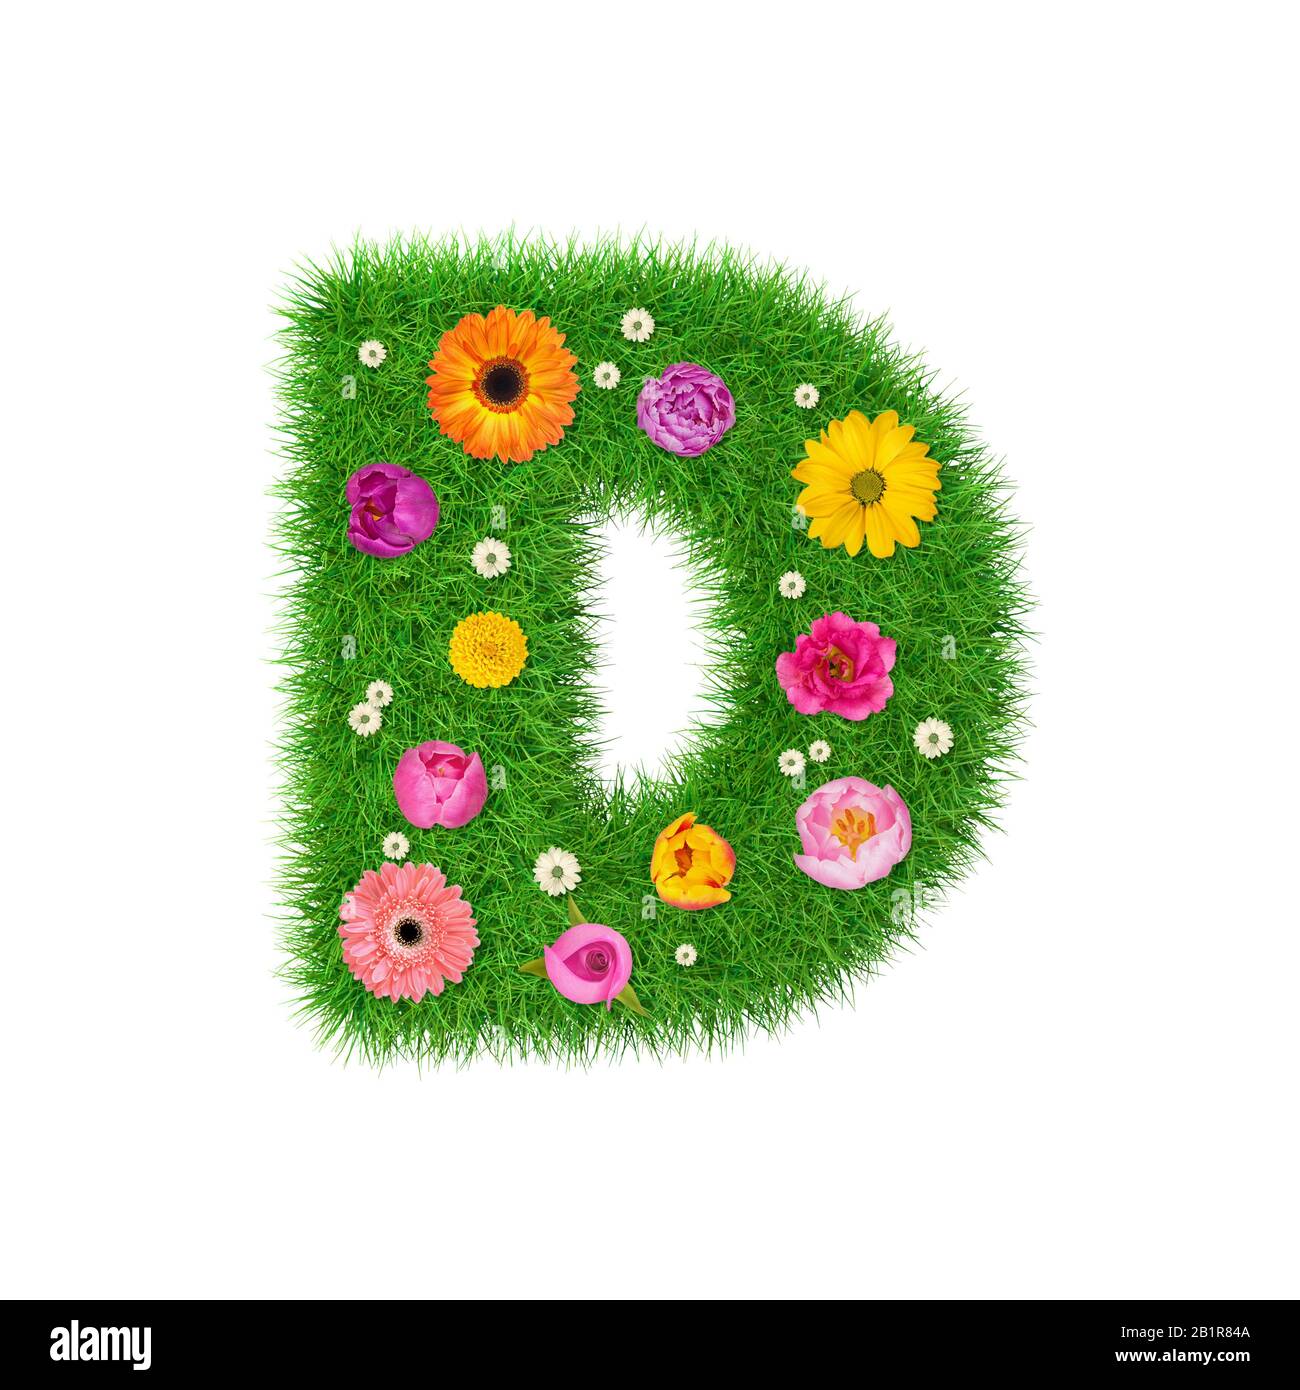 Letter D made of grass and colorful flowers, spring concept for graphic design collage Stock Photo